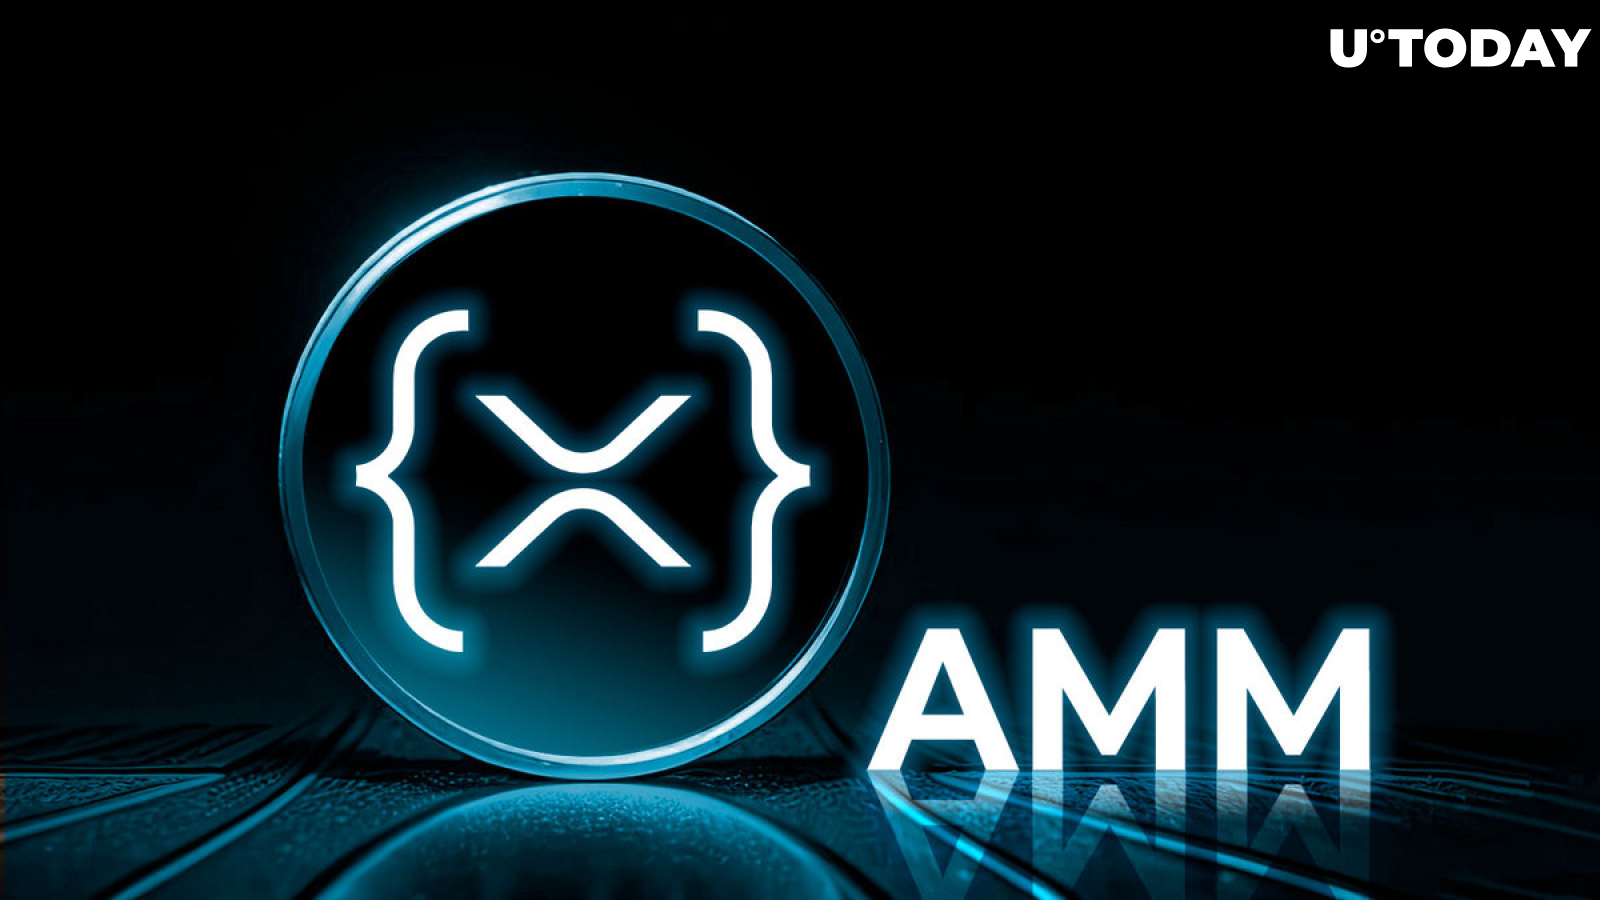 XRPL AMM: These XRP Liquidity Pools Would Be 'Fascinating to Watch'